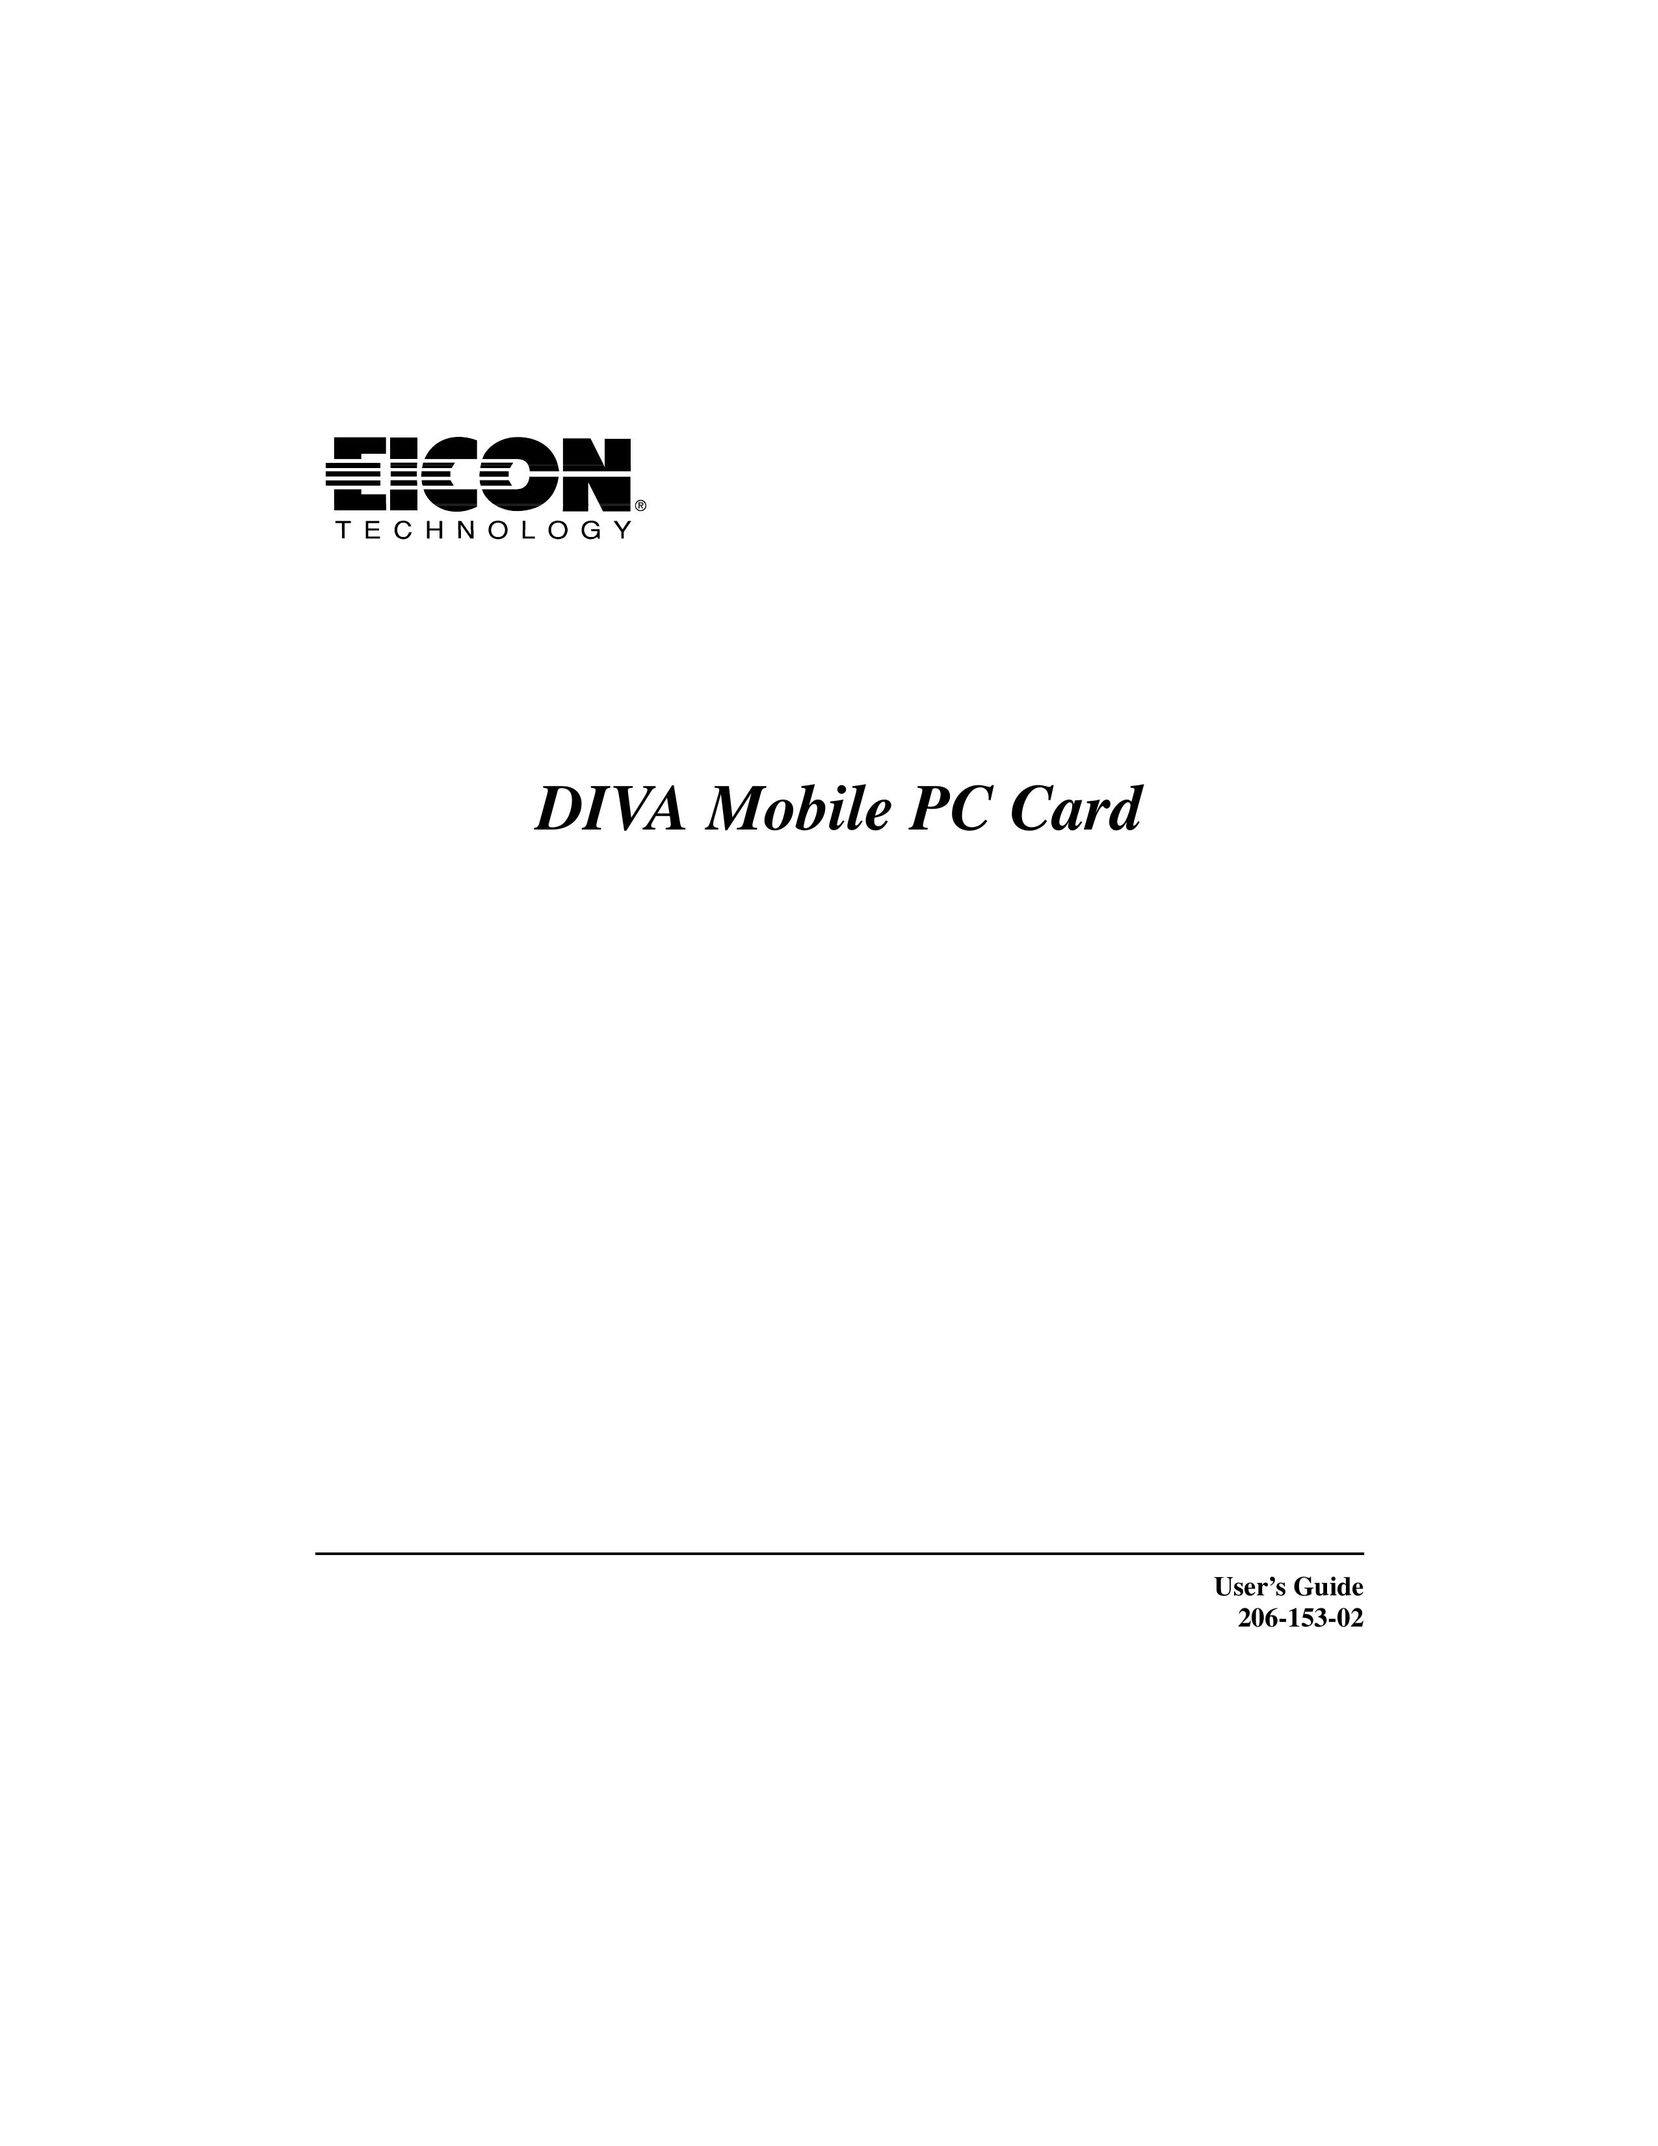 Eicon Networks 800-241 Network Card User Manual